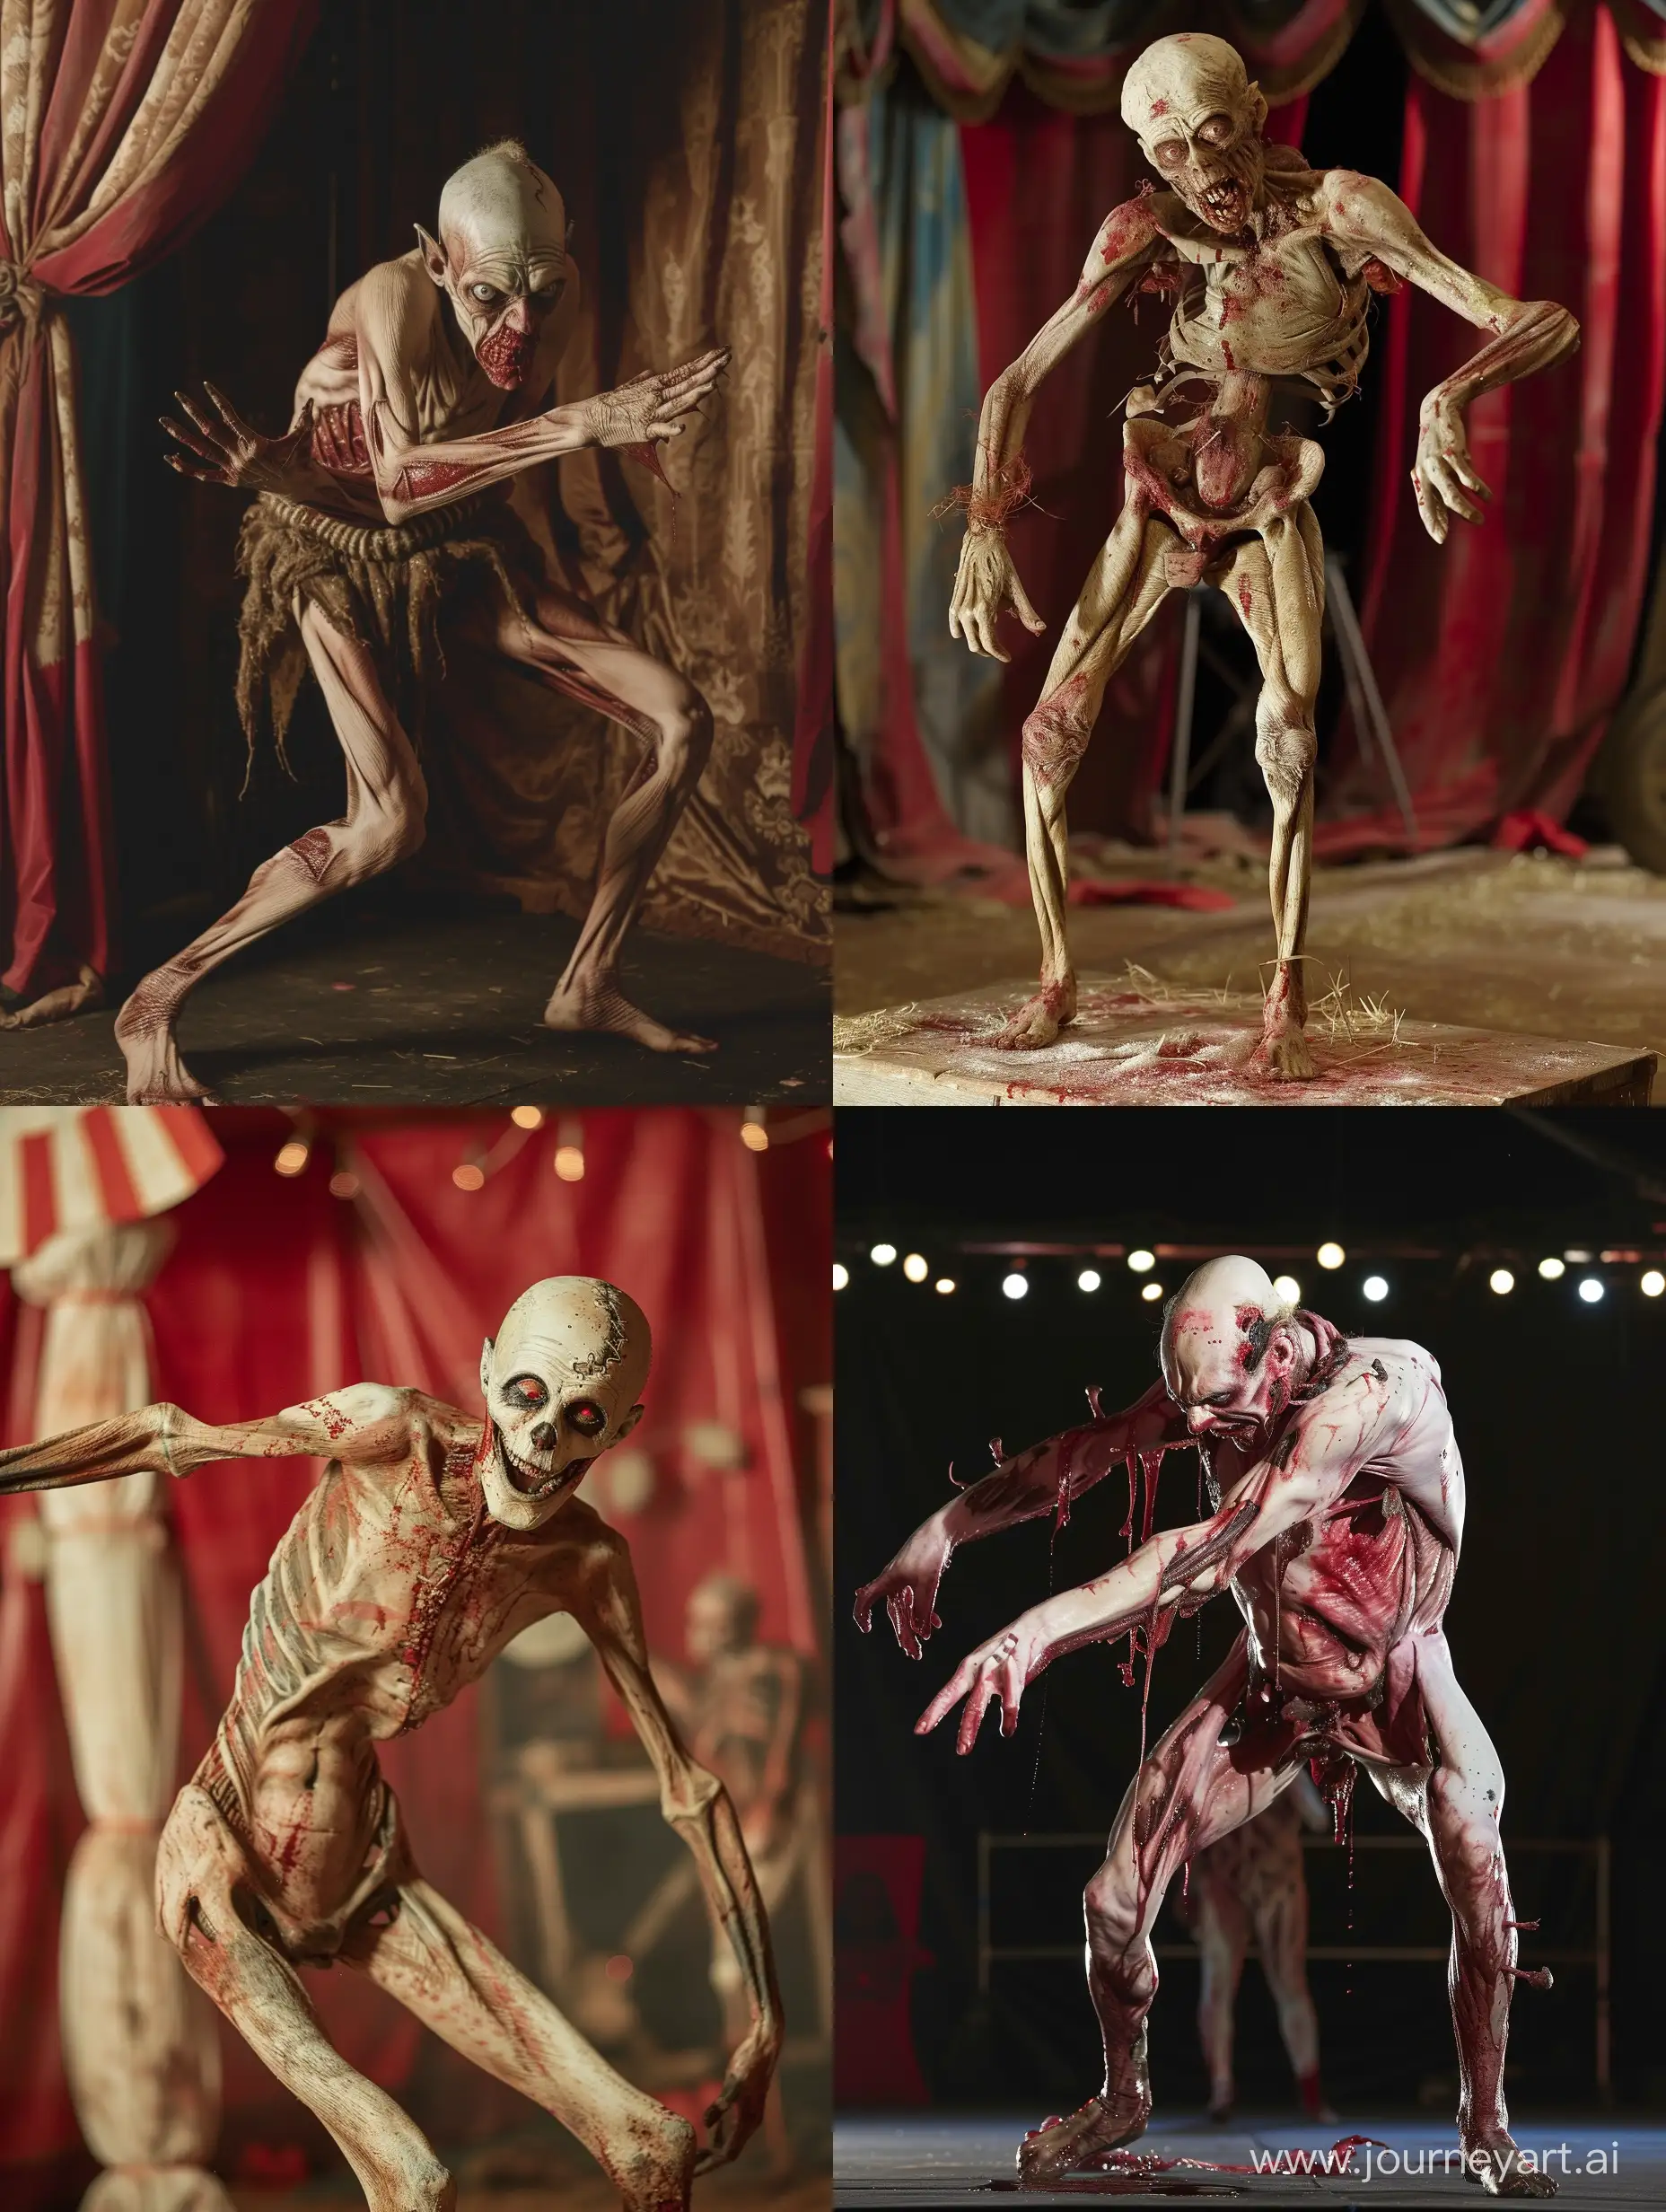 The Body Horror Circus: A sadistic carnival where grotesque performers showcase their deformed bodies, shocking and horrifying the audience with their twisted physicality.